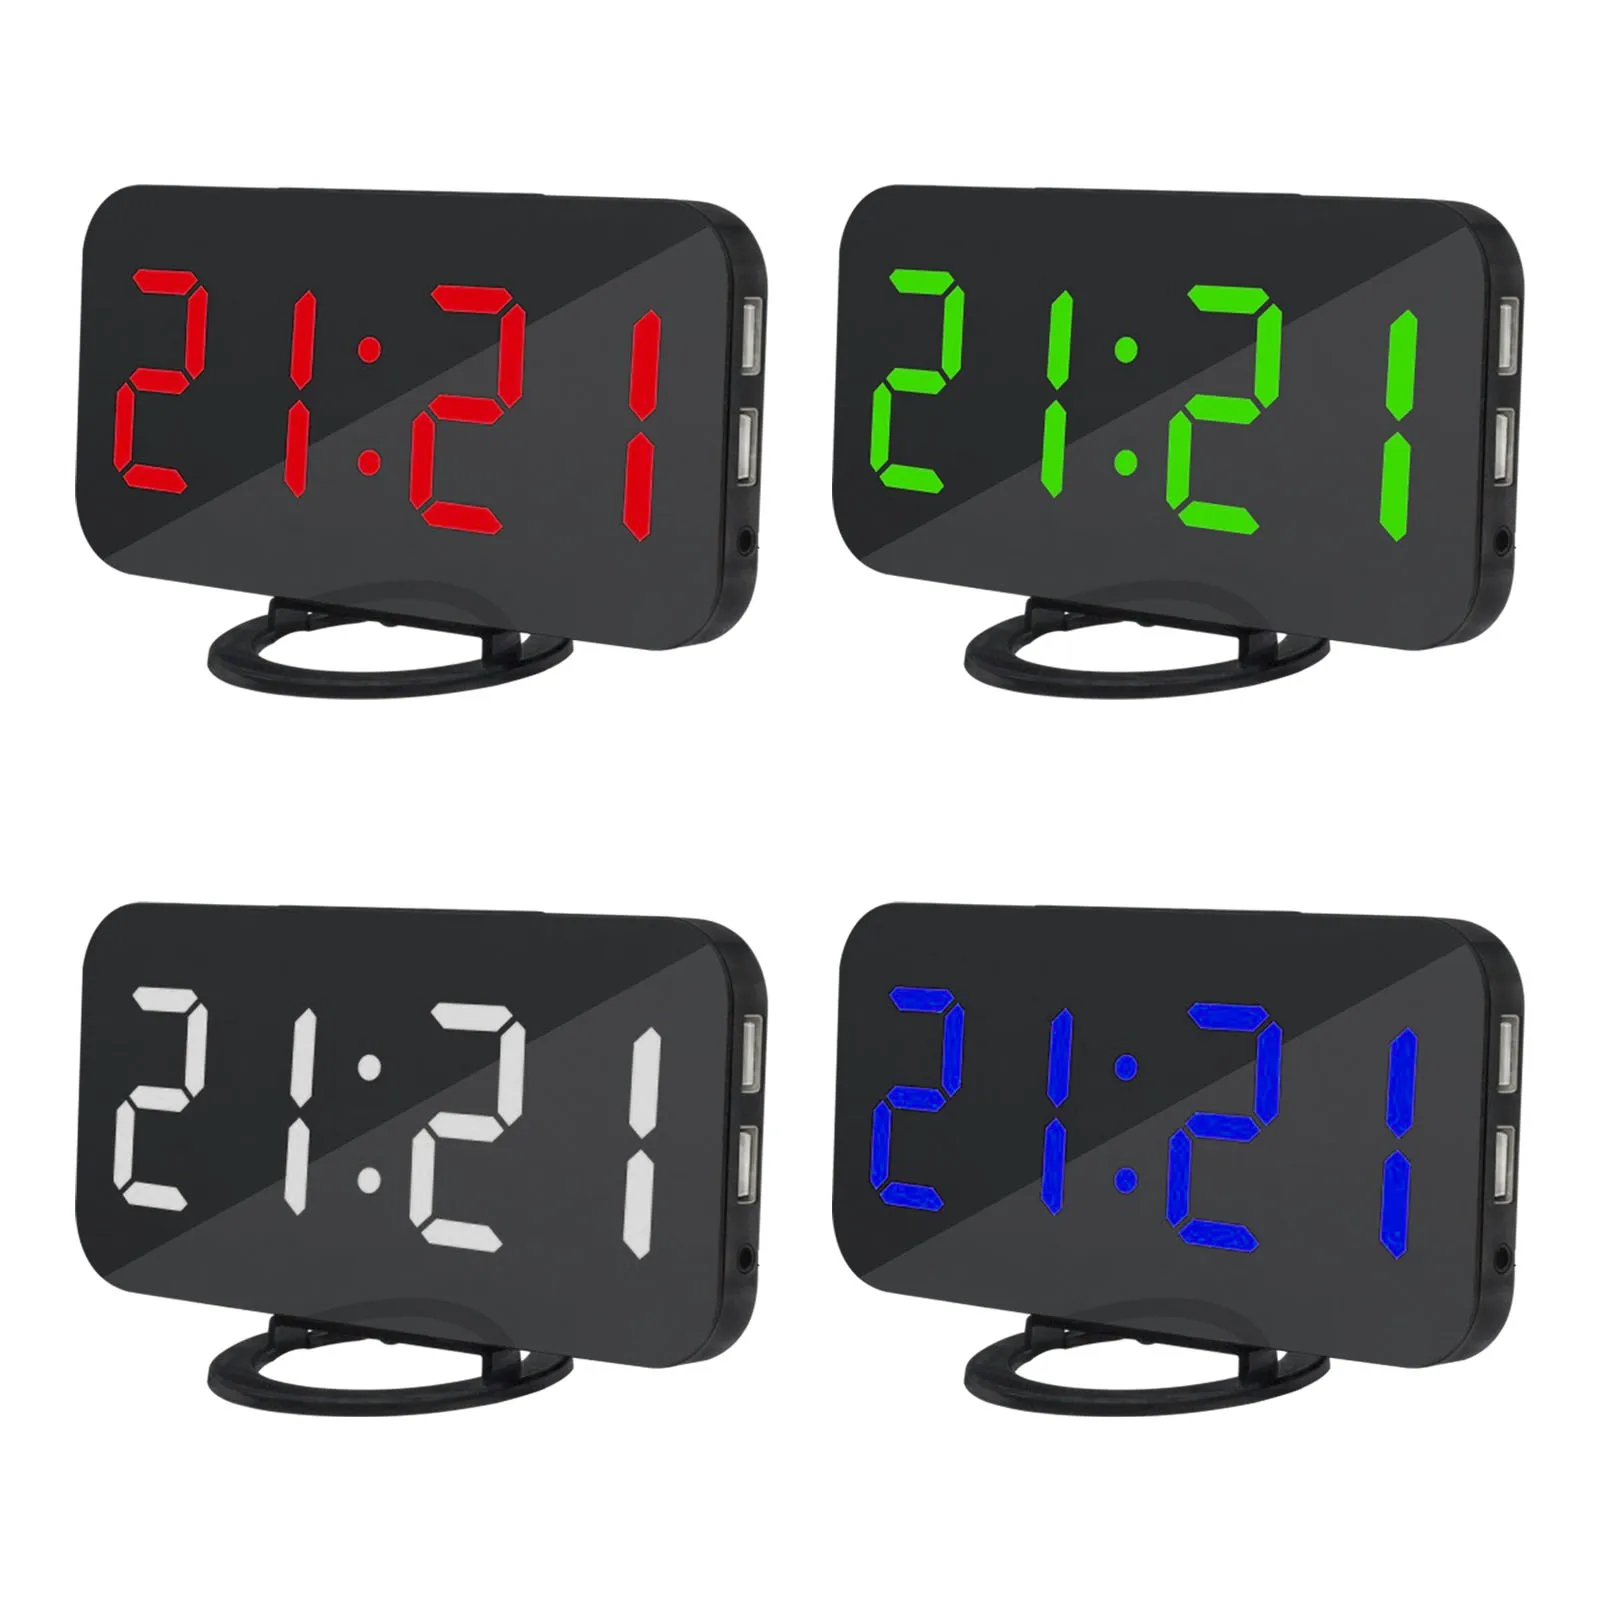 

LED Alarm Clock Mirror Digital Clock Dimmable Night Mode Bedside Clock 2 USB Output Ports Table Clock Electronic effective